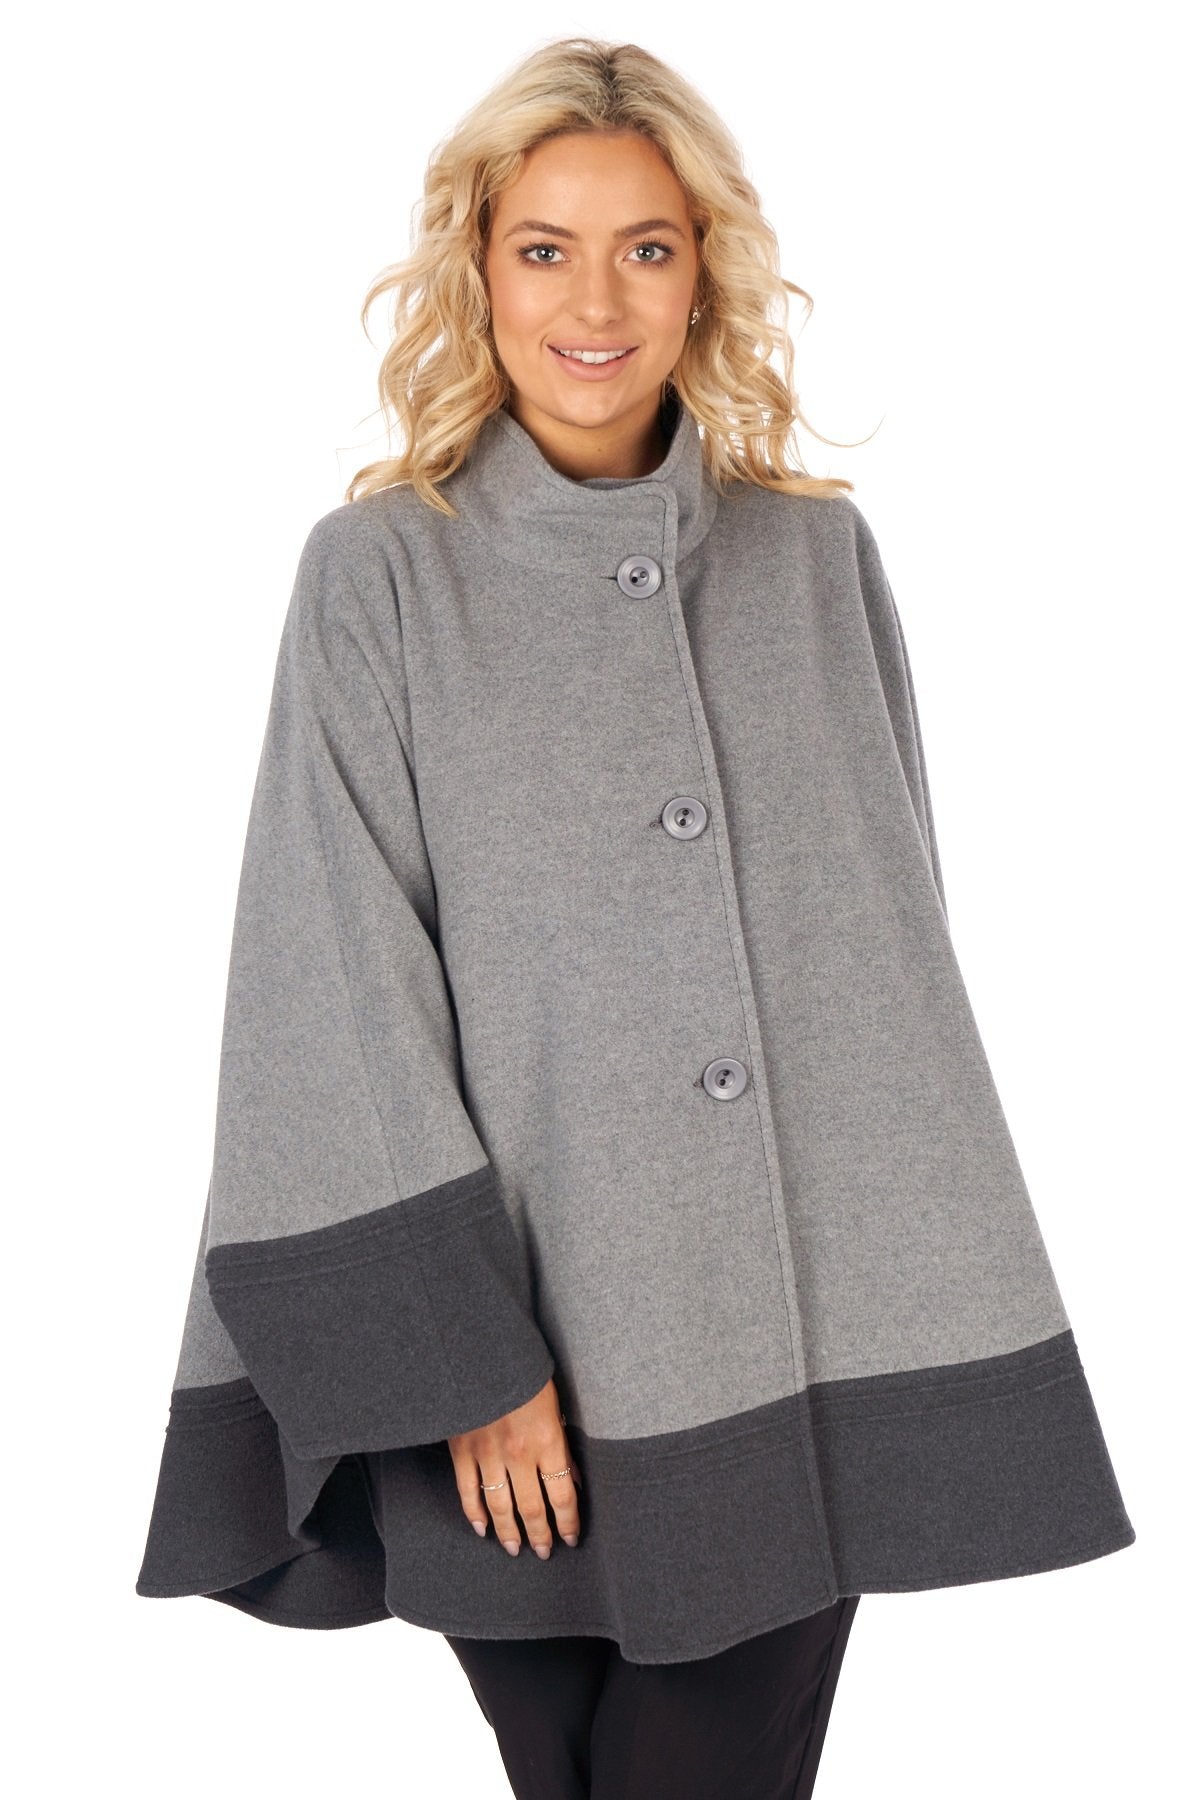 Two tone grey women's cape with 3 large buttons and mandarin collar by Jimmy Hourihan, Dublin, Ireland